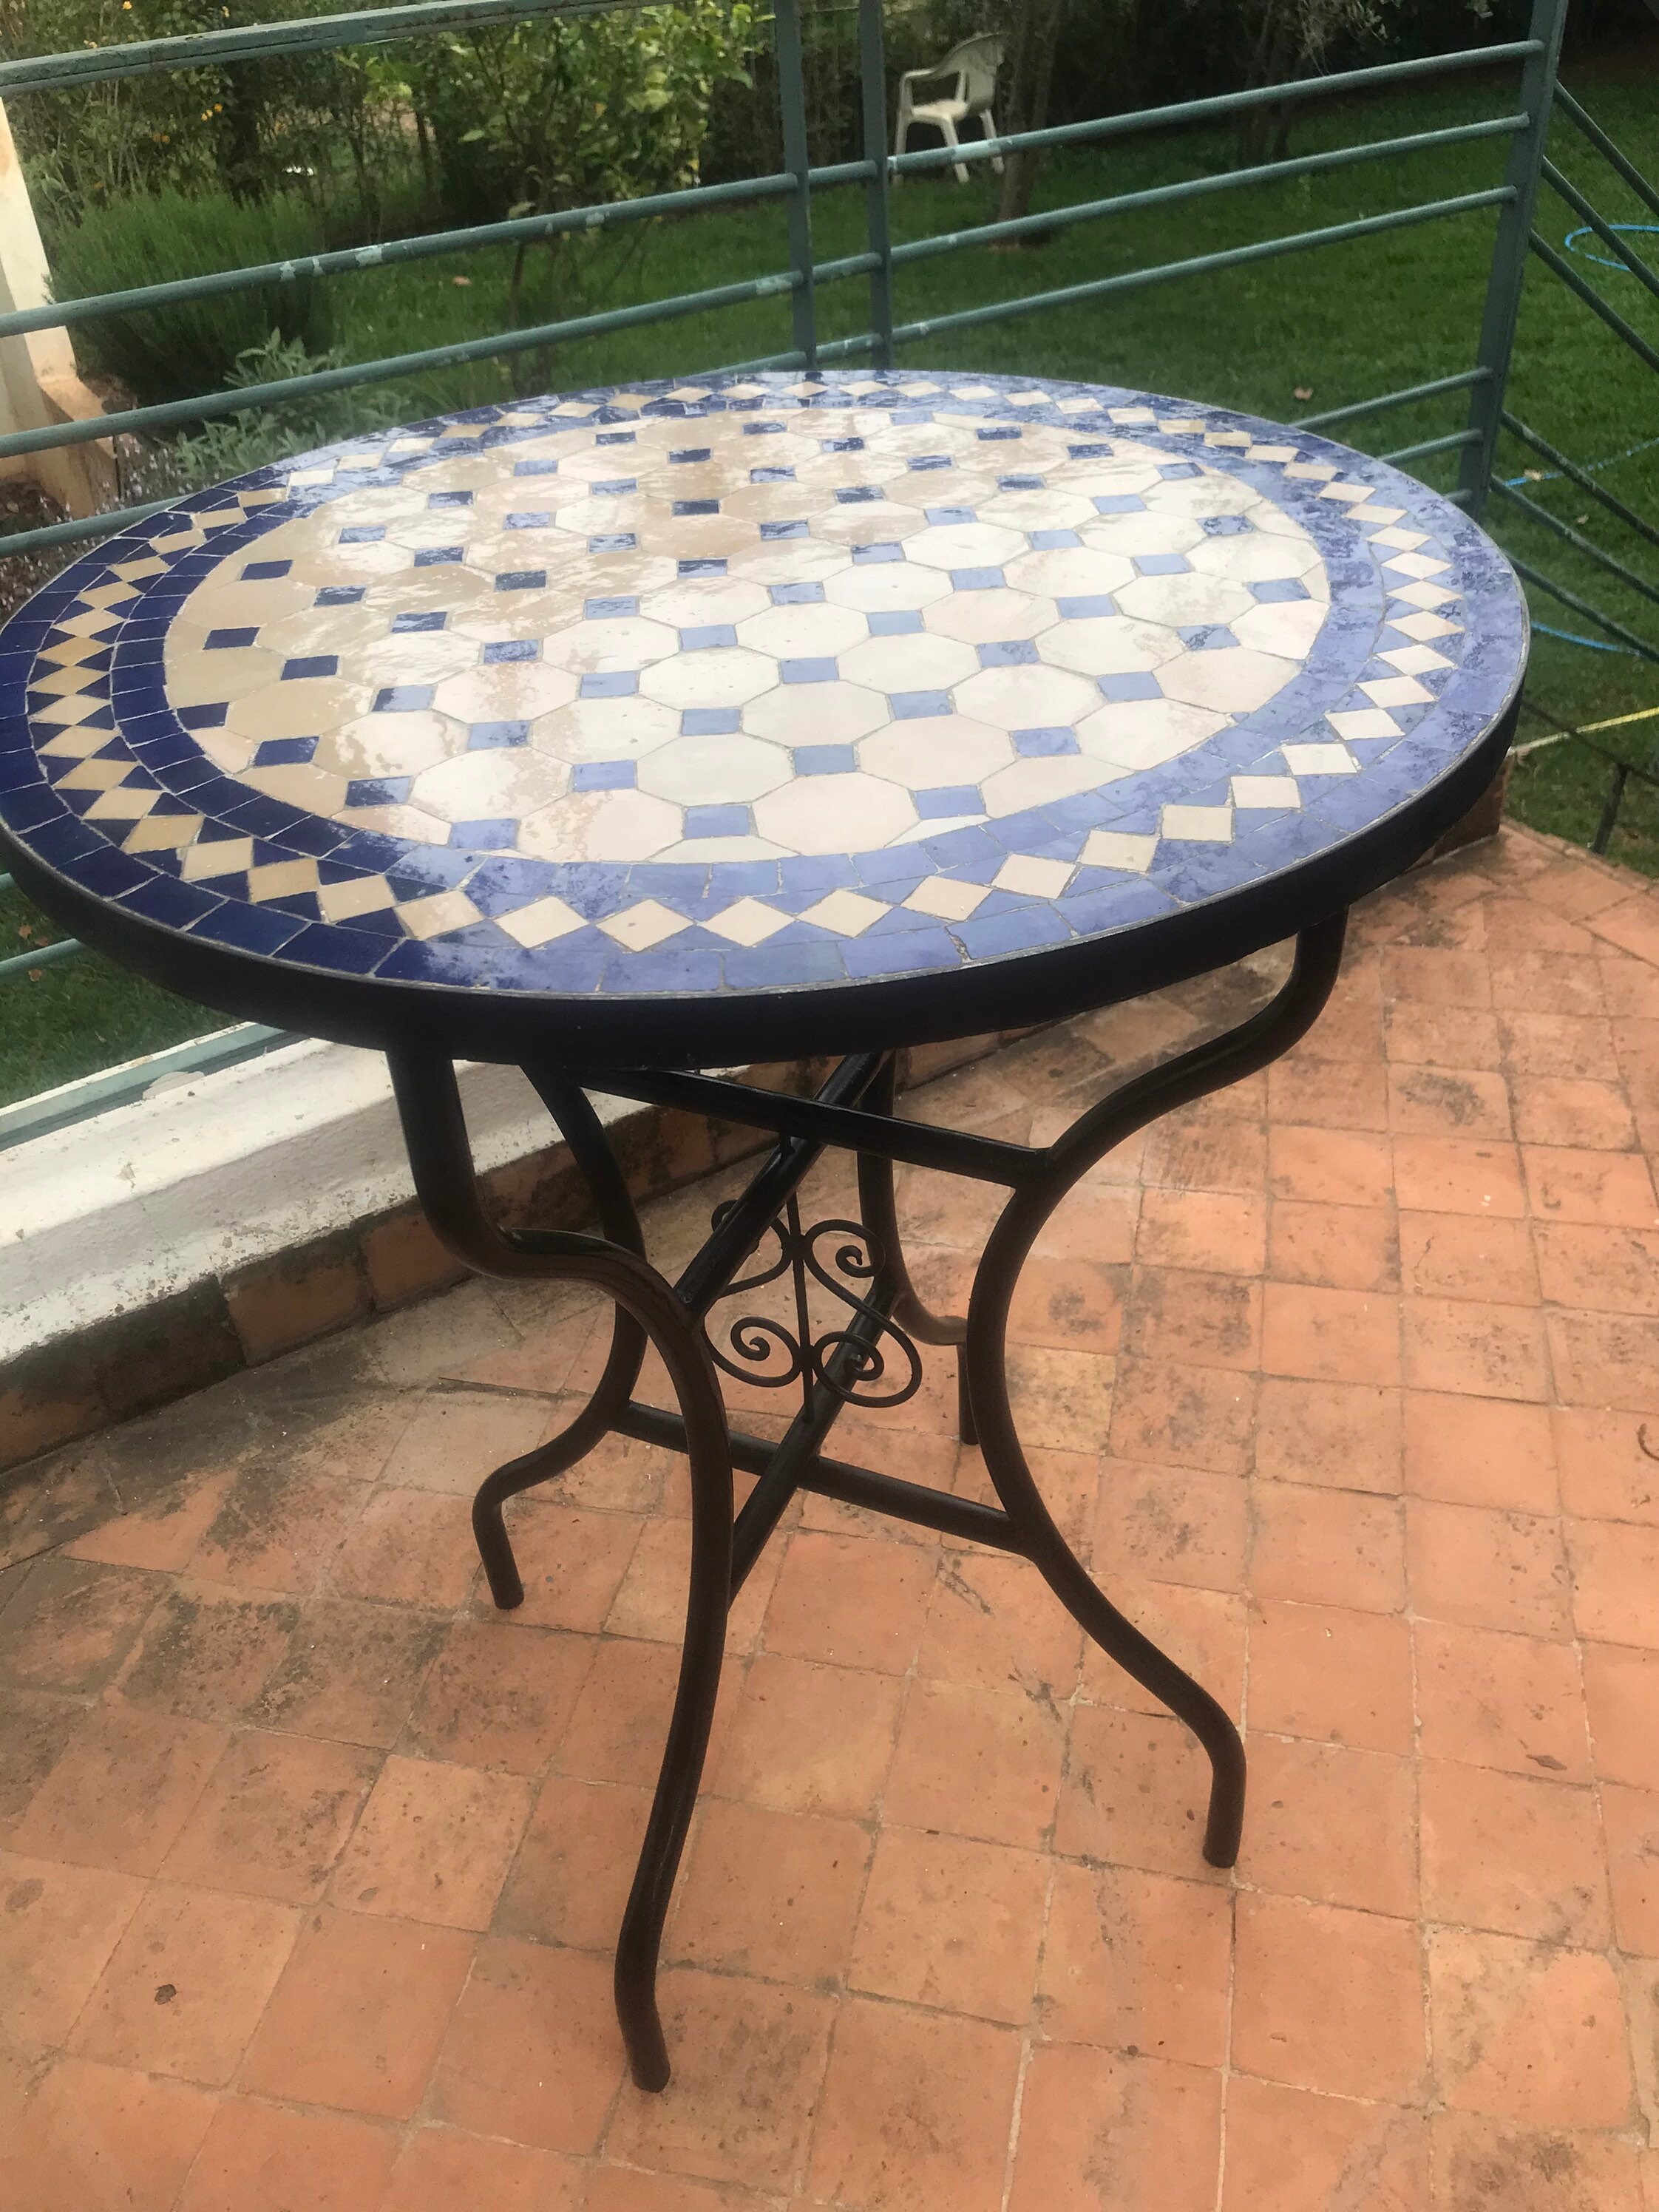 Personalized Design,Handcrafted Table,Round Table, Classic Moroccan Tile Table,Free Shipping,Ceramic Table,Amazing Indoor & Outdoor Mosaic